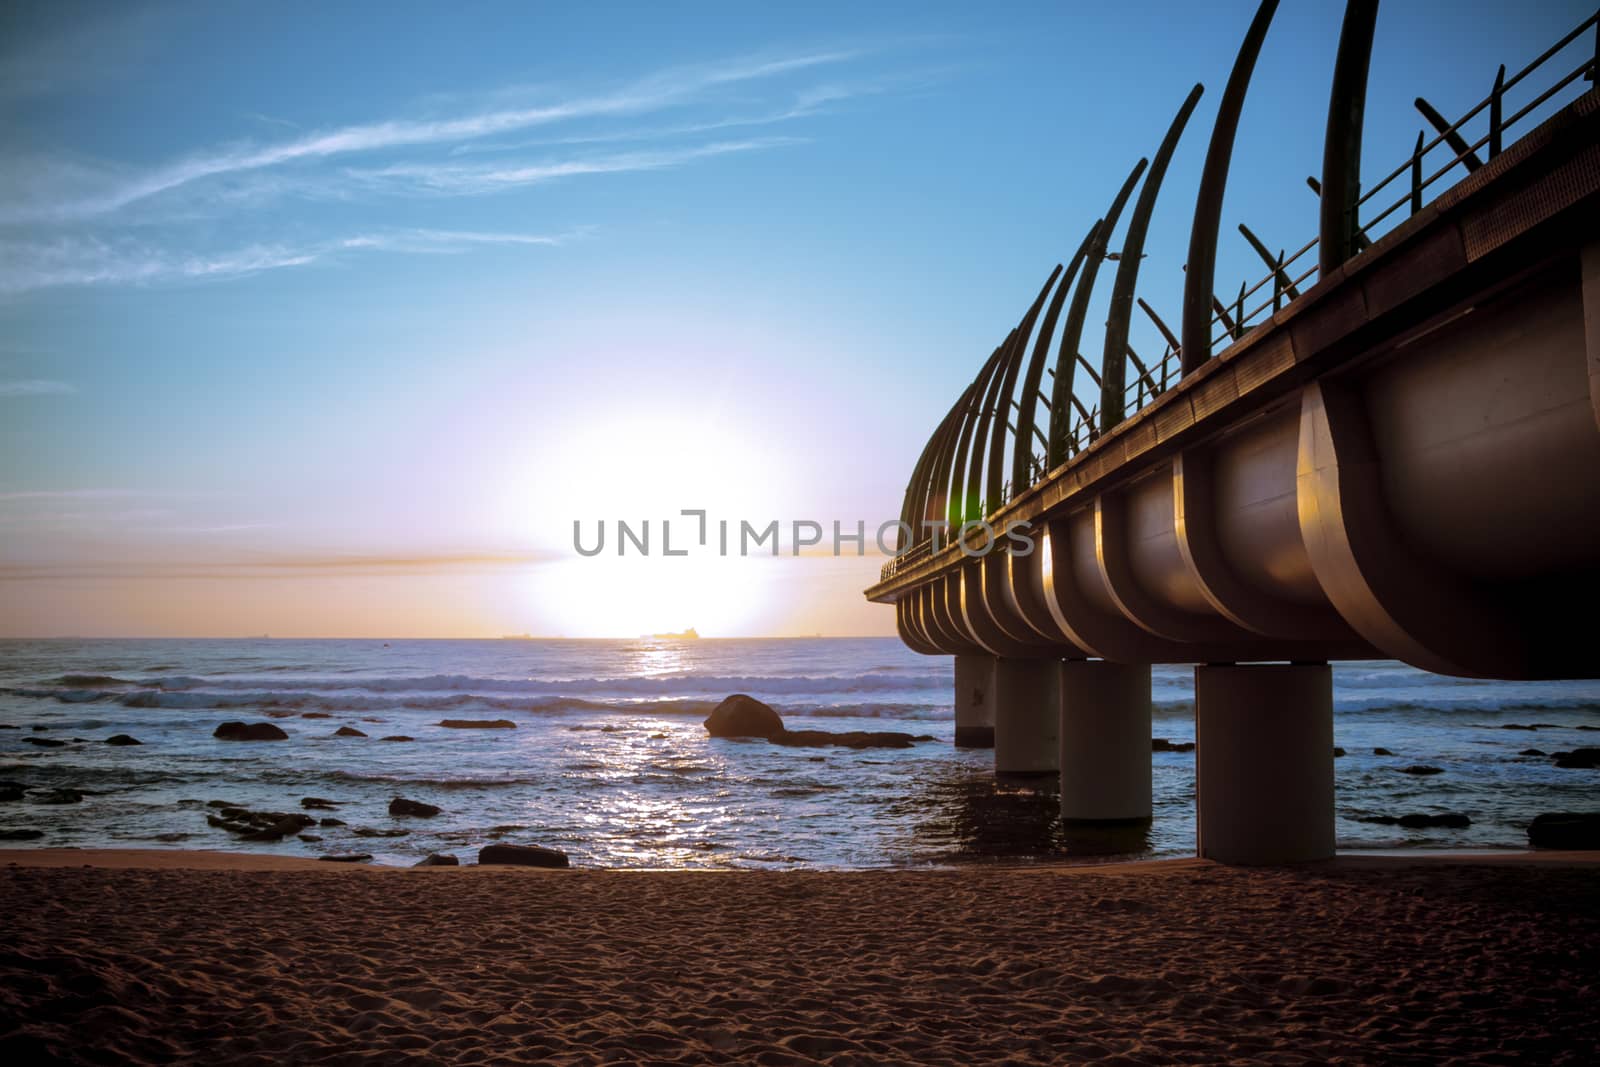 The Umhlanga Pier in durban South Africa In the Sunrise over Indian Ocean